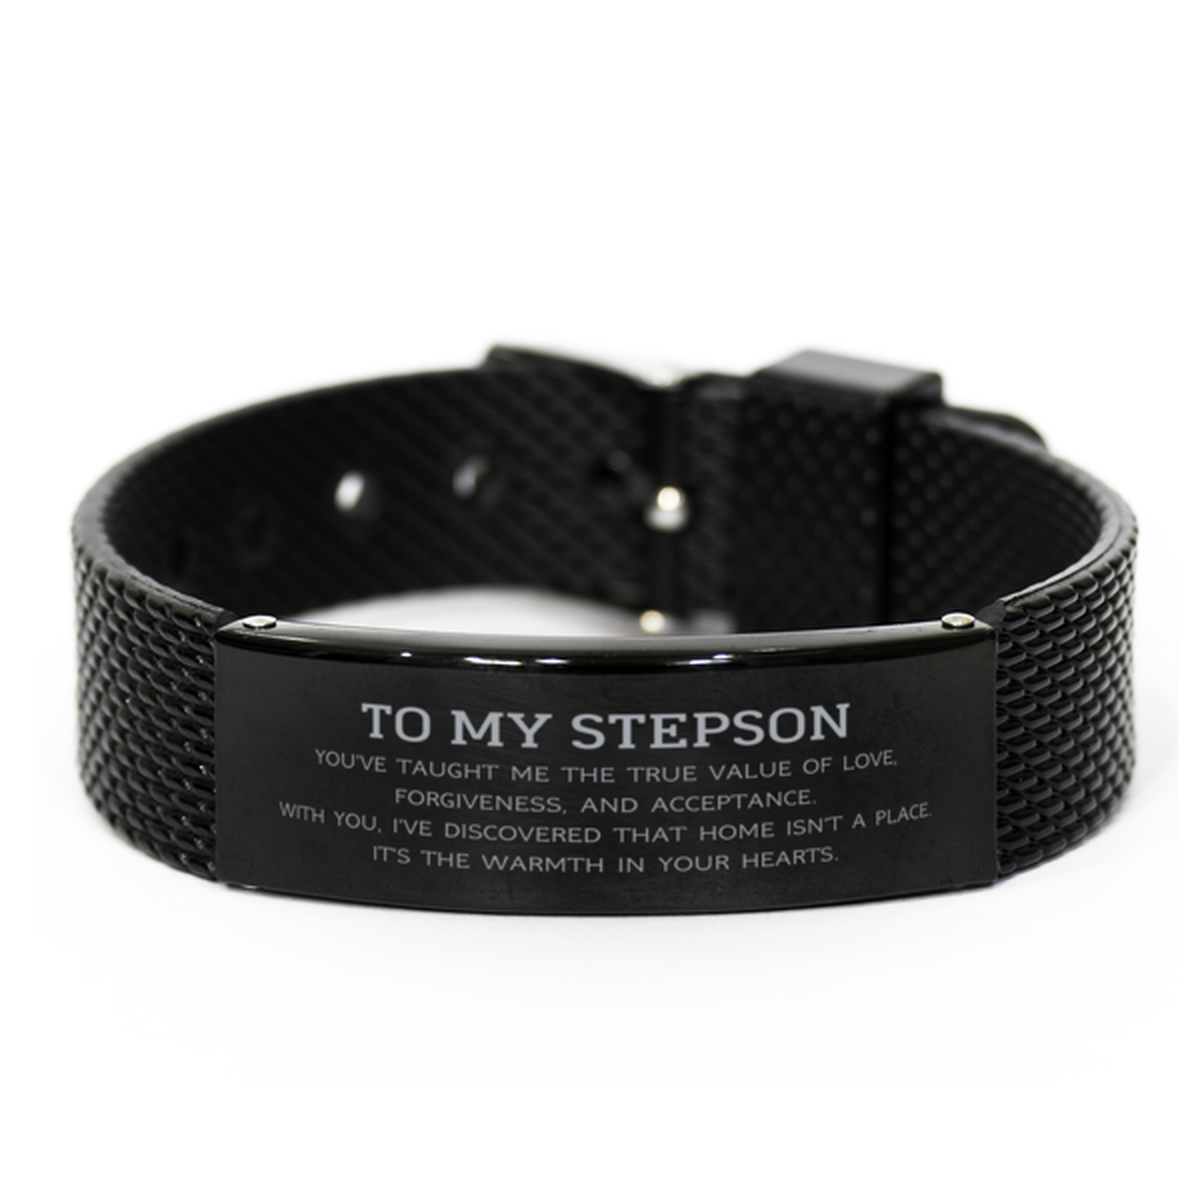 To My Stepson Gifts, You've taught me the true value of love, Thank You Gifts For Stepson, Birthday Black Shark Mesh Bracelet For Stepson